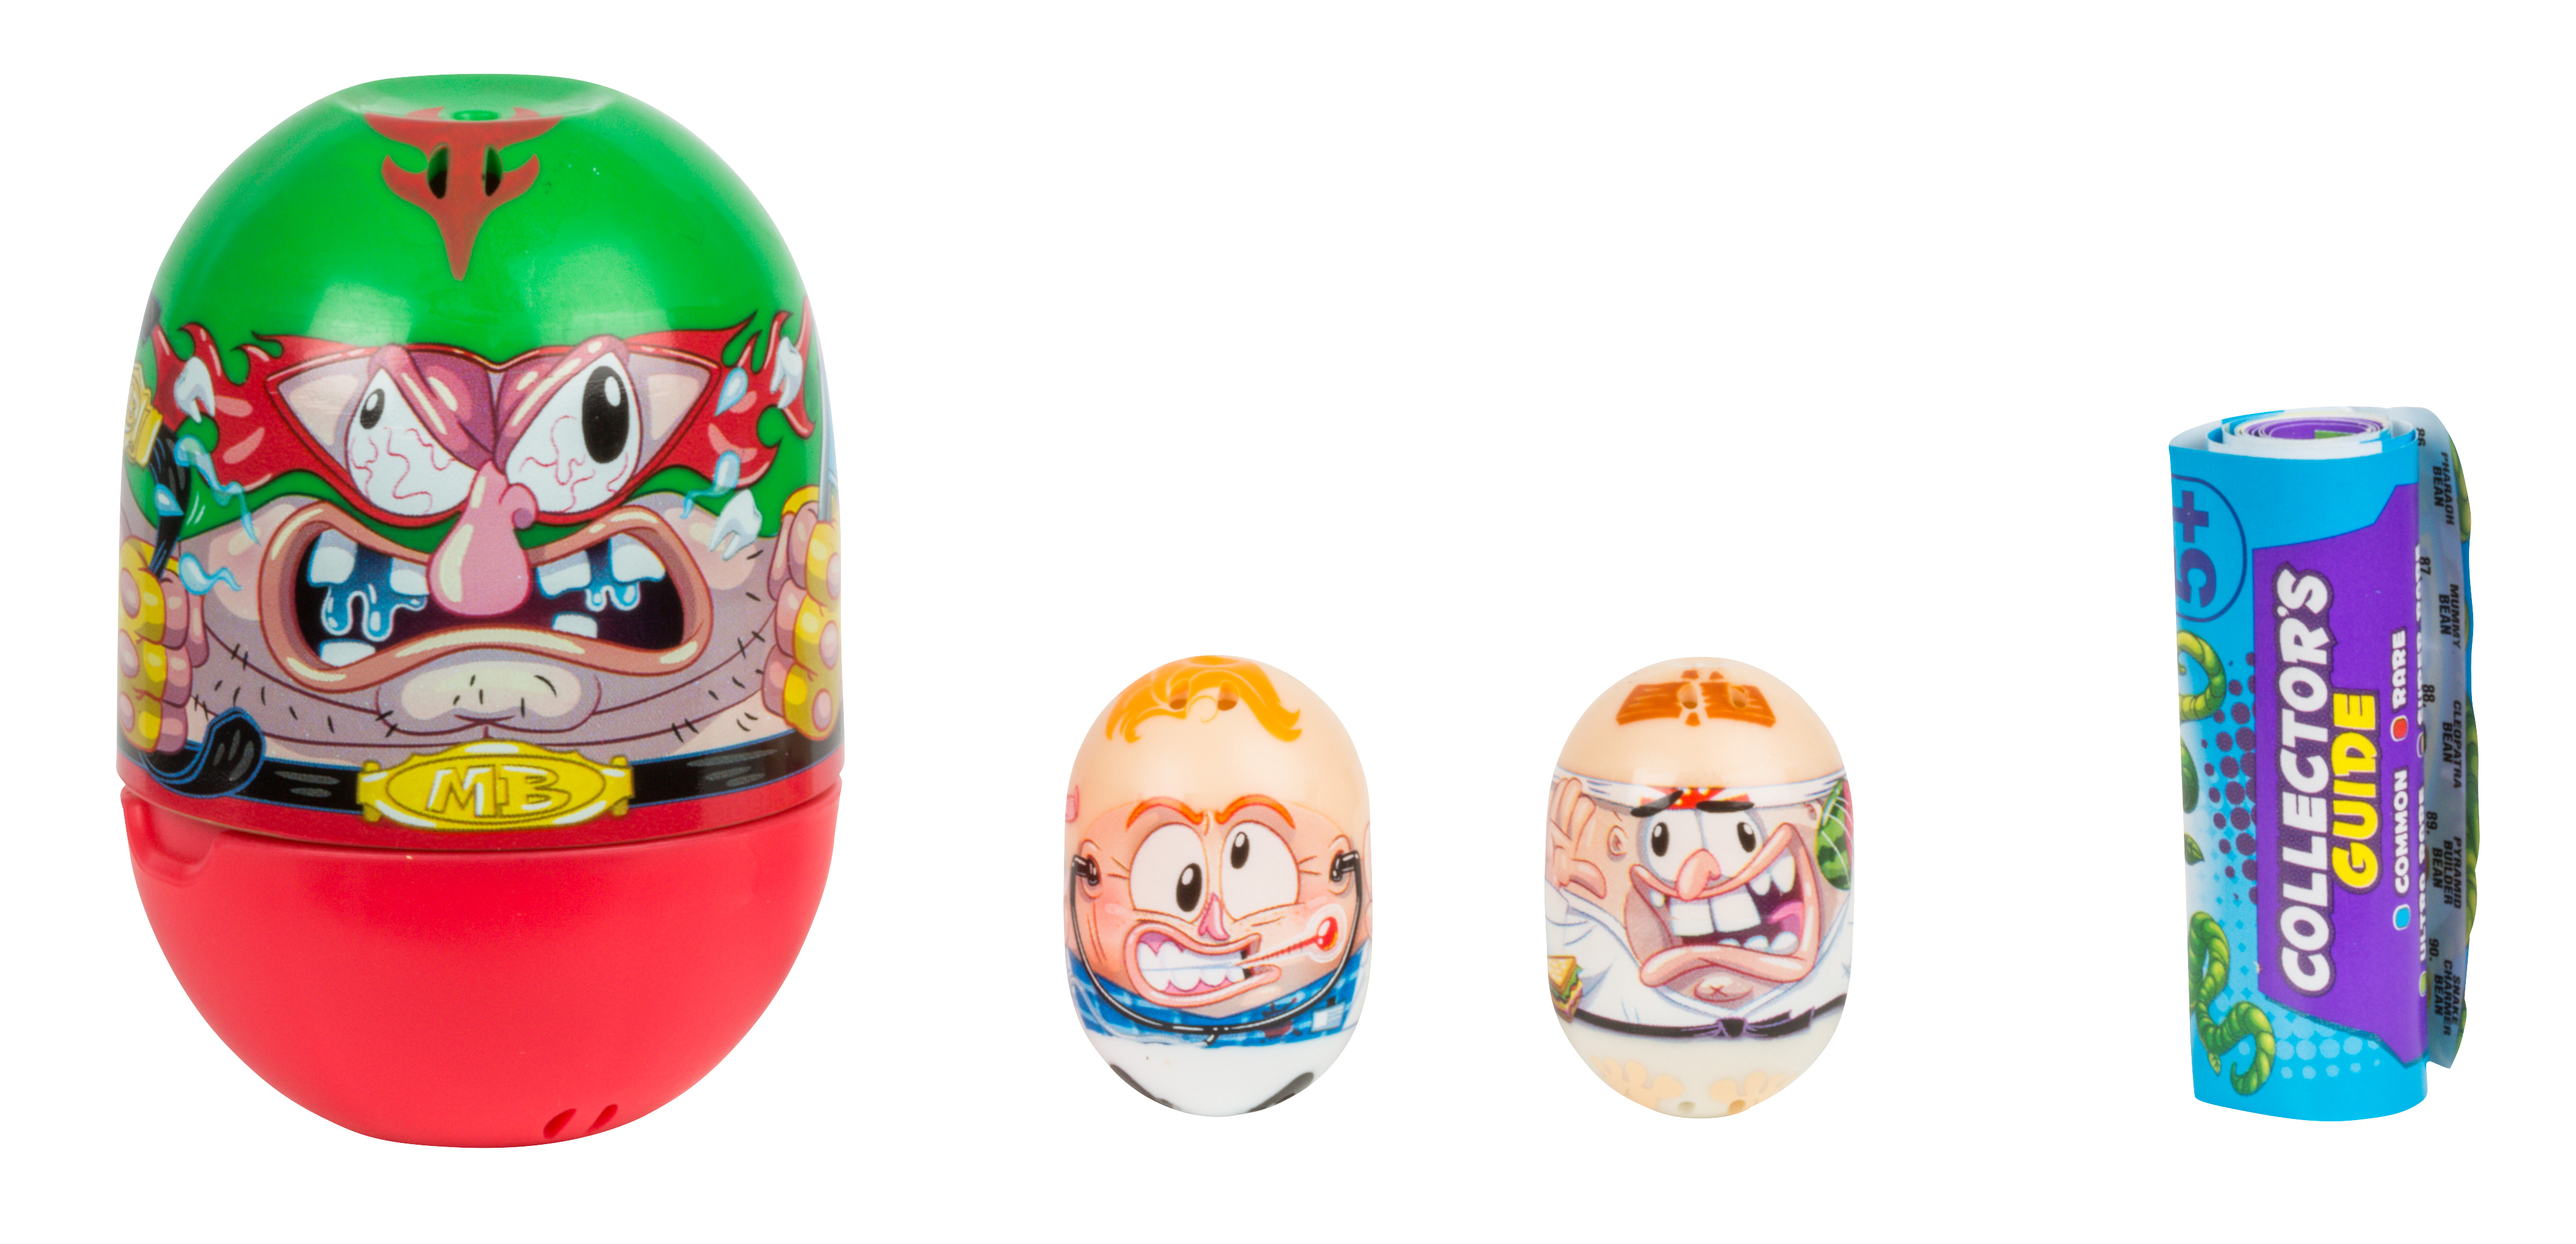 Mighty Beanz Mystery Bean 2-Pack with Collectible Container - image 1 of 6